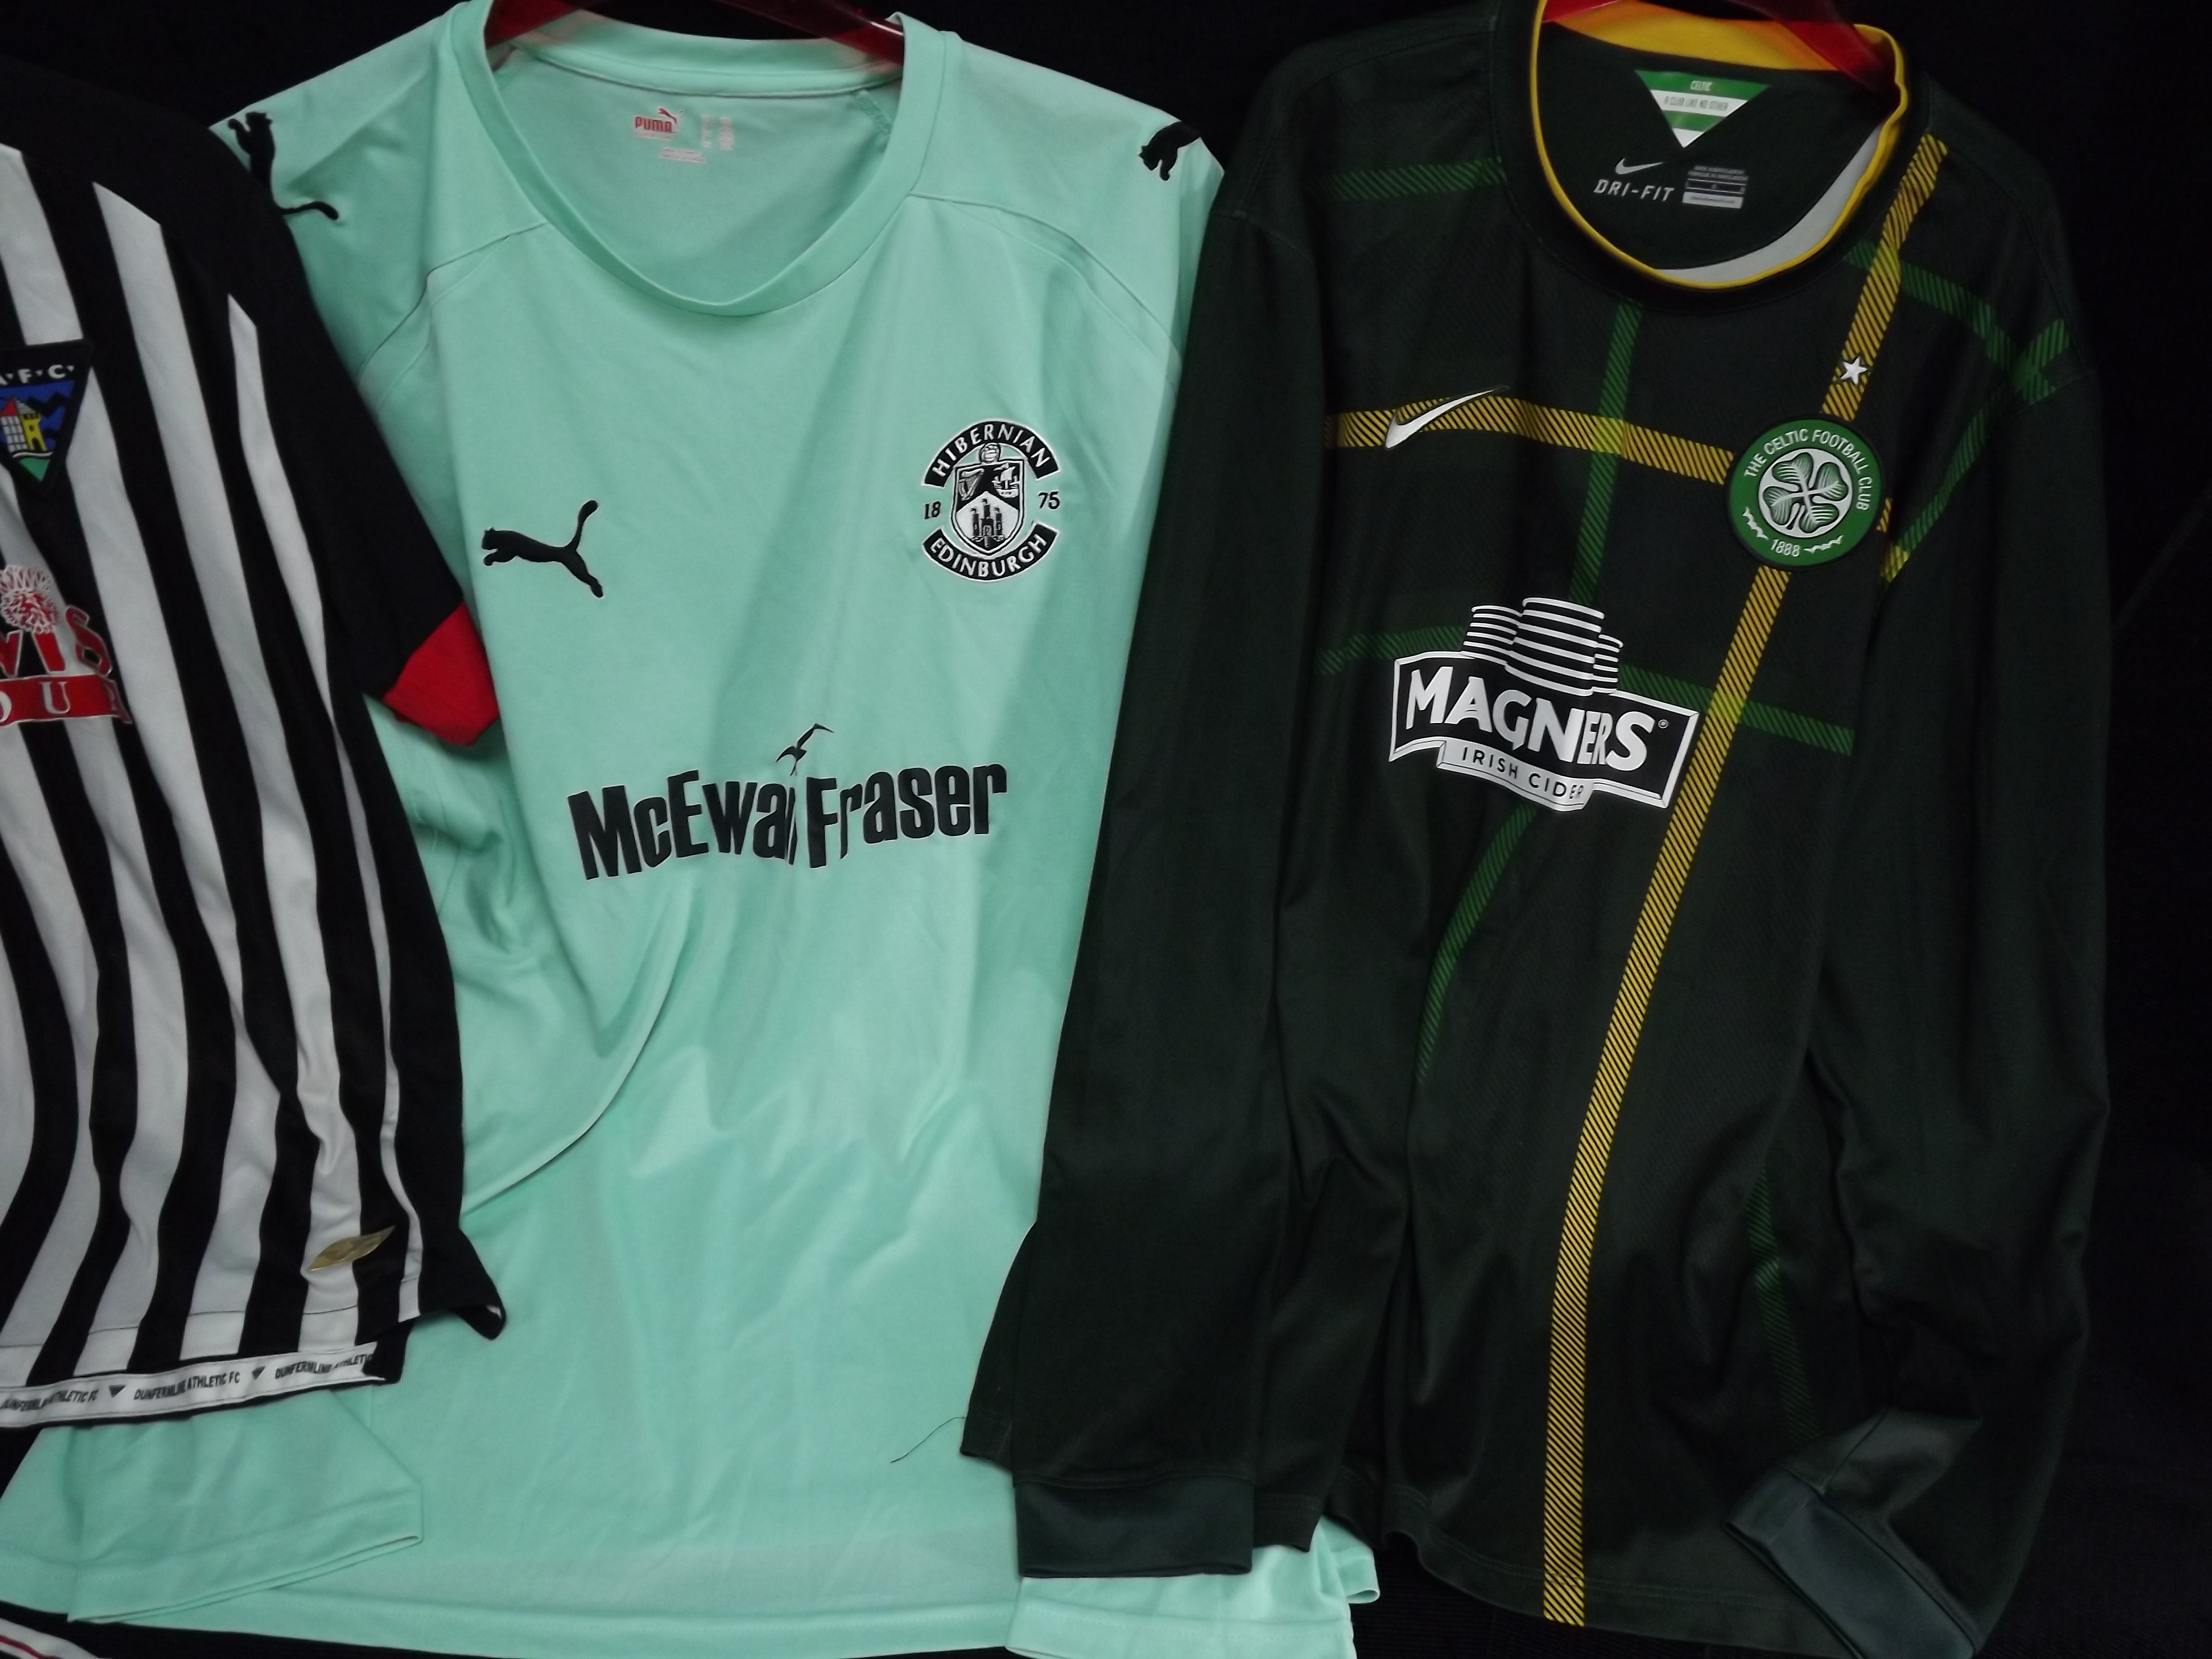 6 x Scottish Football Shirts. Celtic Magners 'A Like No Other' 2014/15 Green Away(Light Wear Large), - Image 2 of 5